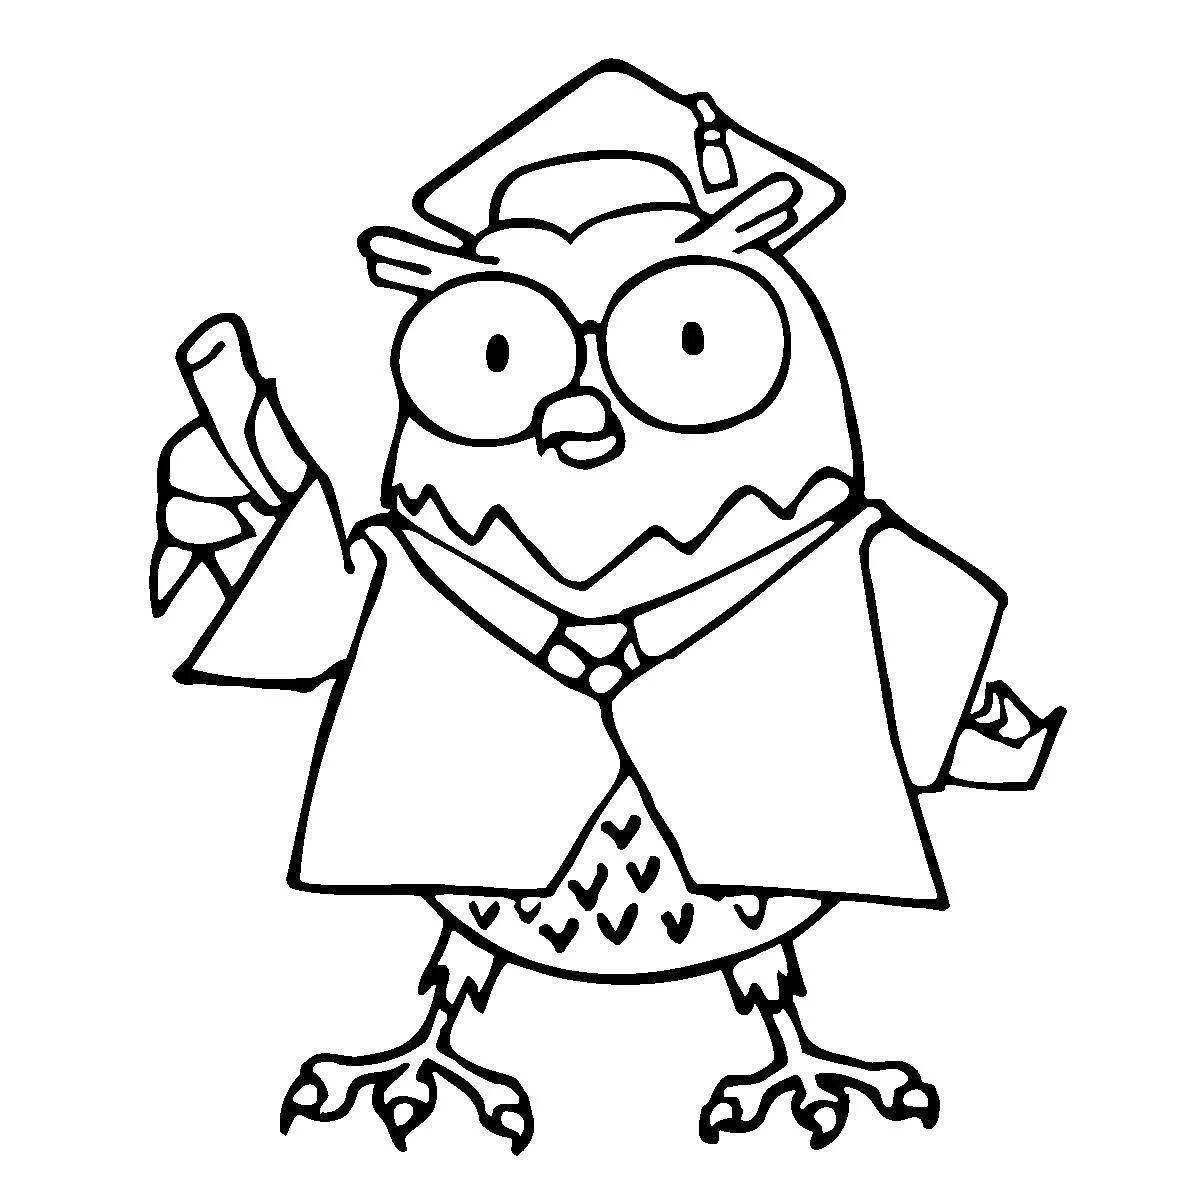 Gorgeous smart owl coloring book